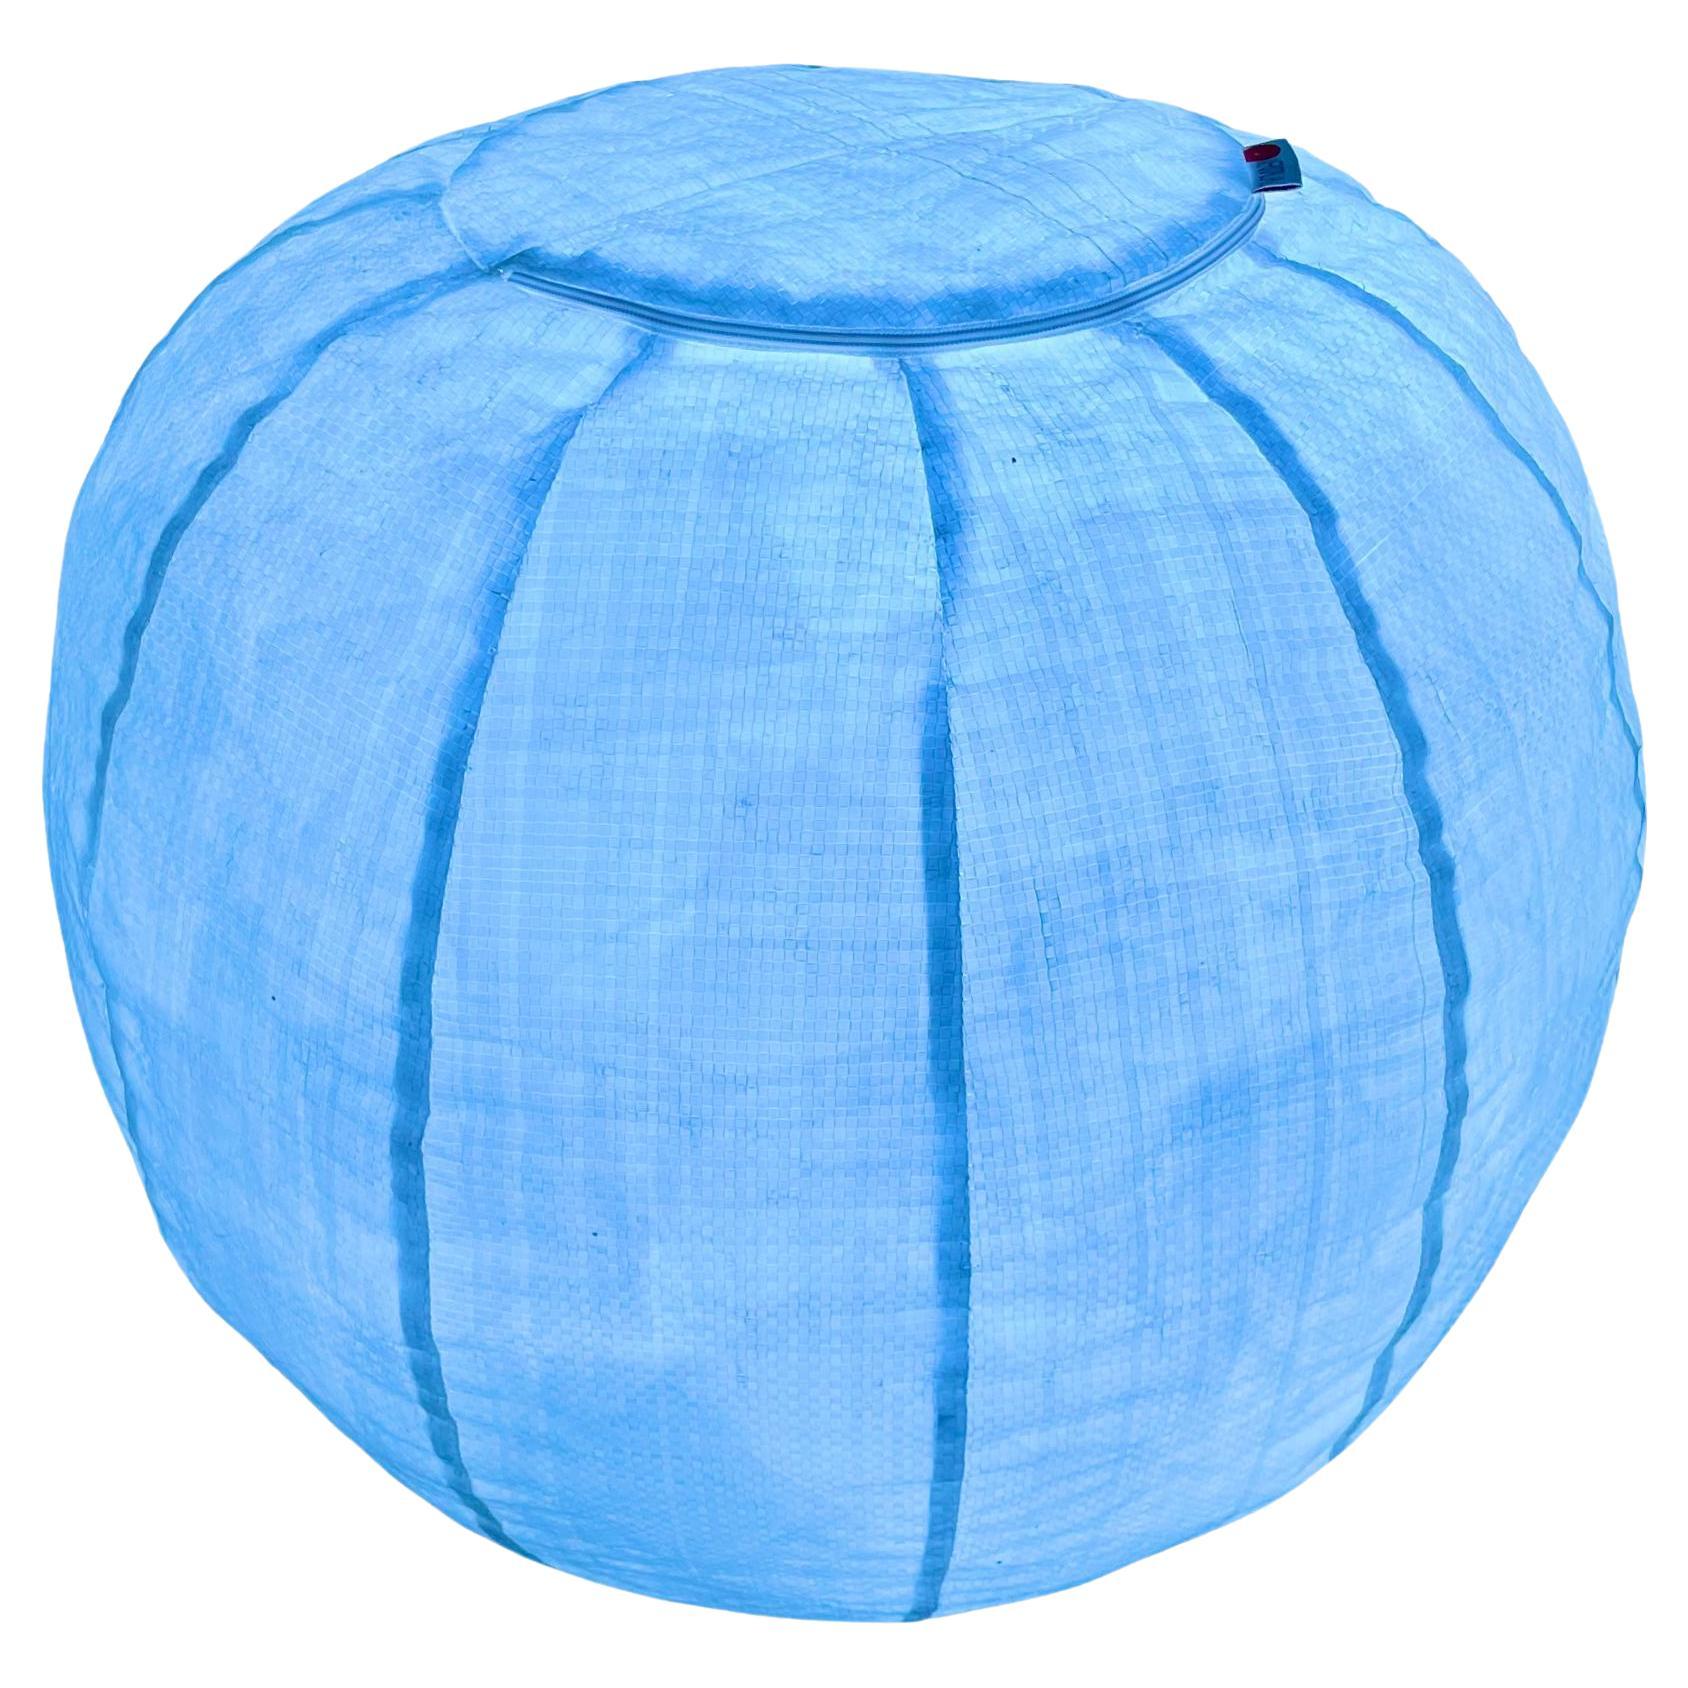 Stunning woven palstic pouf by Mario Bellini with built in LED lights. Made for Meritalia in 2000s. Original label still attached. Mesh pouf is filled with hundreds of air filled shipping packets. This Meritalia collection is based around the body's